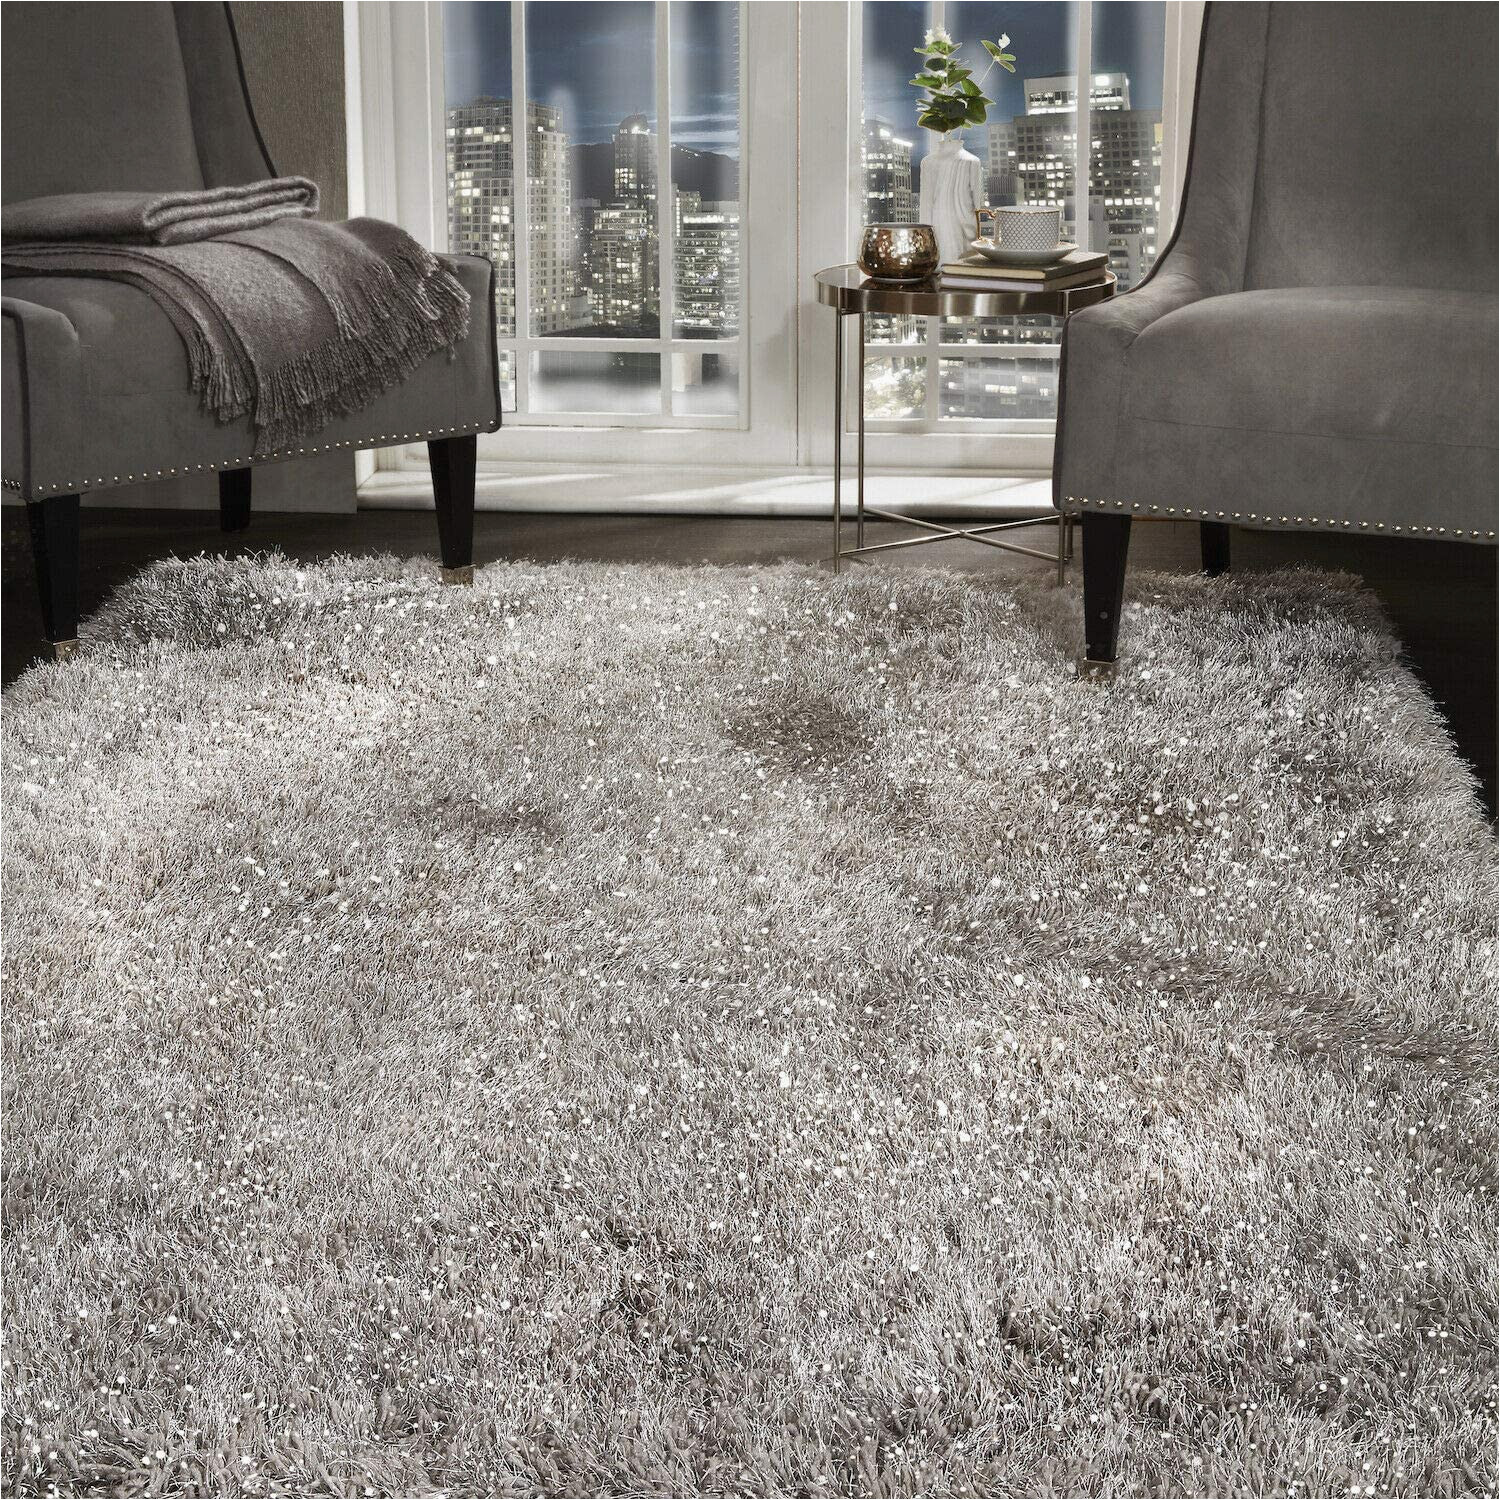 Super Cheap Large area Rugs Shaggy Rug Super Plush Extra Large Rugs Living Room with Shimmering Sparkle Glitter Strands Fluffy 55mm Thick Pile Height Modern area Rugs – (silver …